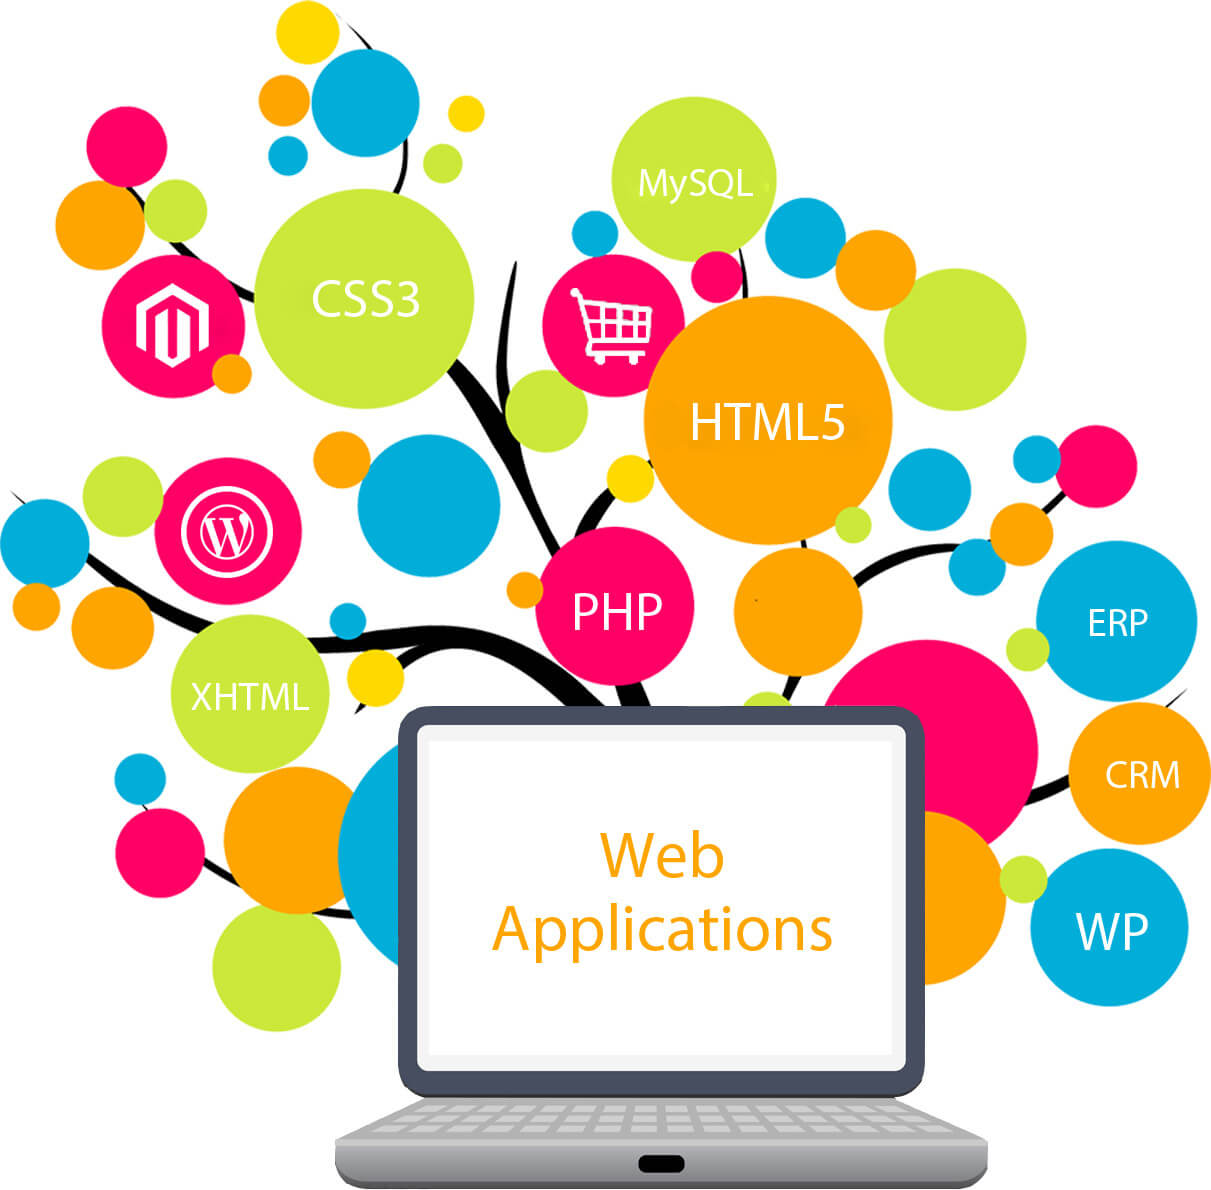 Why Should Businesses use Web Applications? - WEQ Technologies  Softwares,  Web and Mobile Application Company in Mumbai India